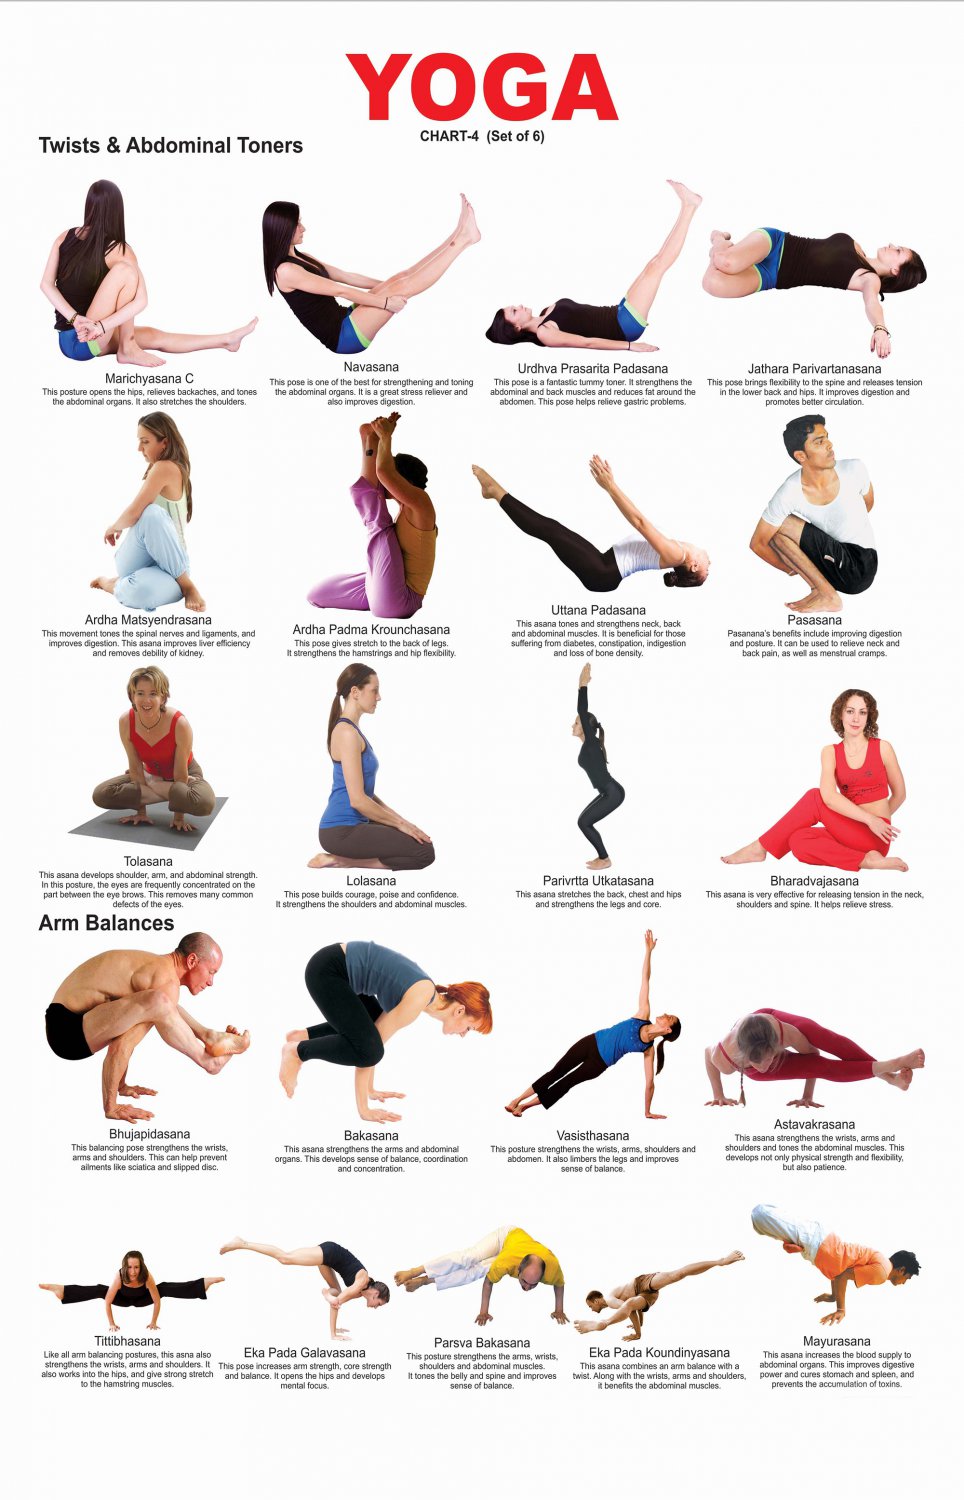 Yoga Twists and Abdominal Toners Chart 13"x19" (32cm/49cm) Polyester Fabric Poster